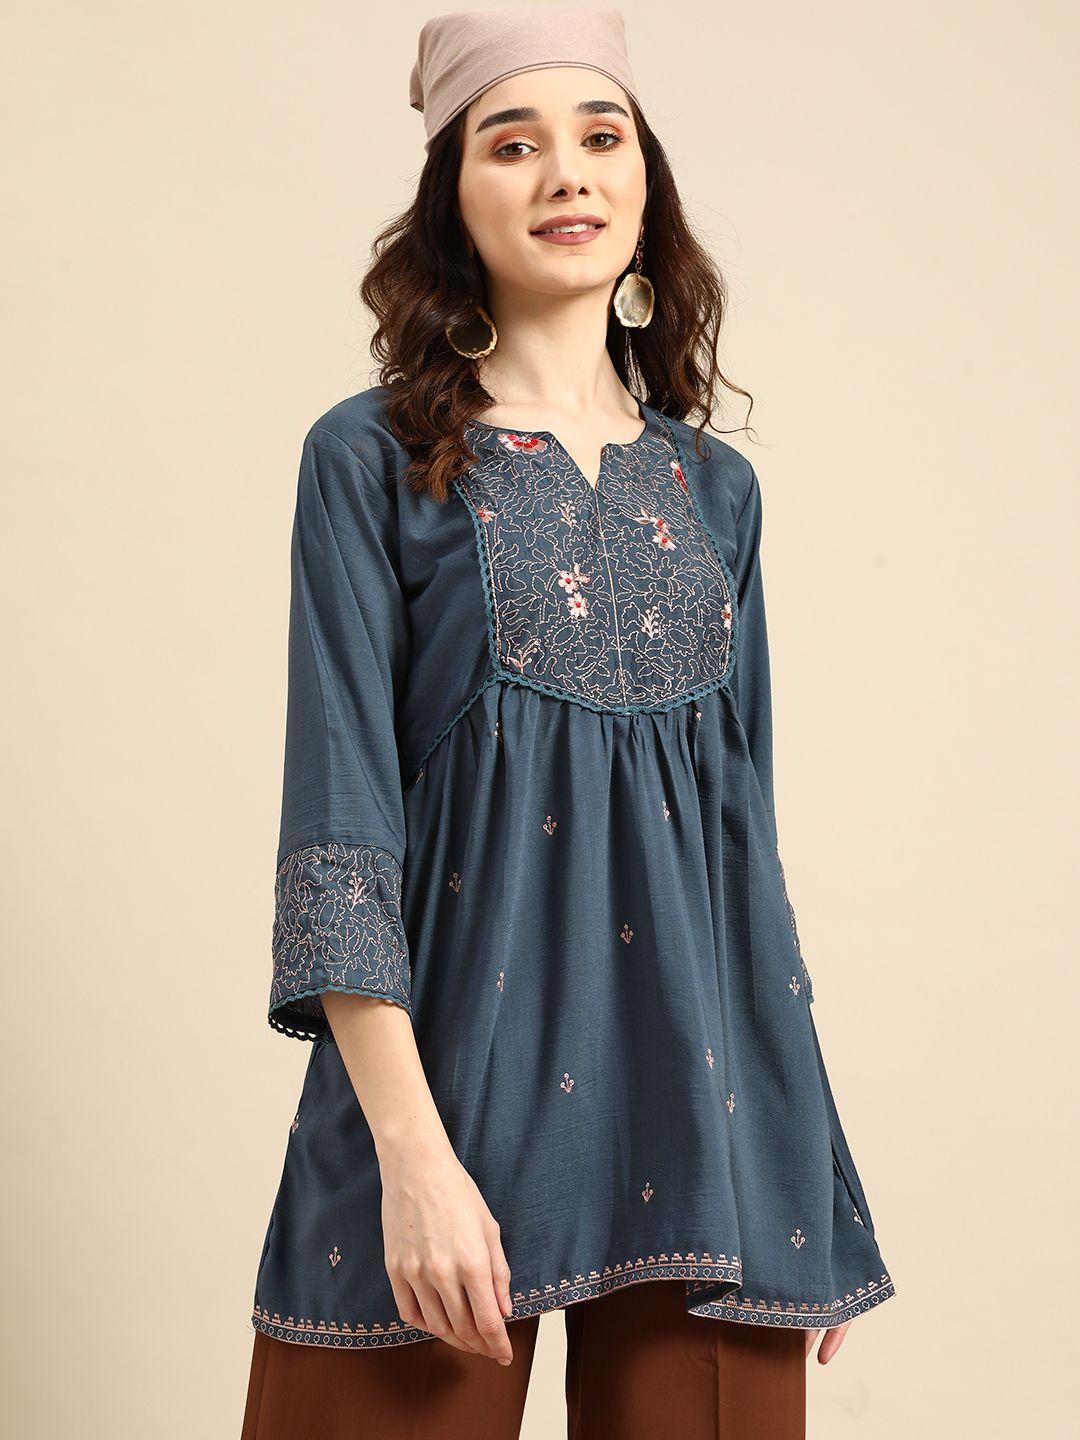 sangria teal blue embroidered longline top